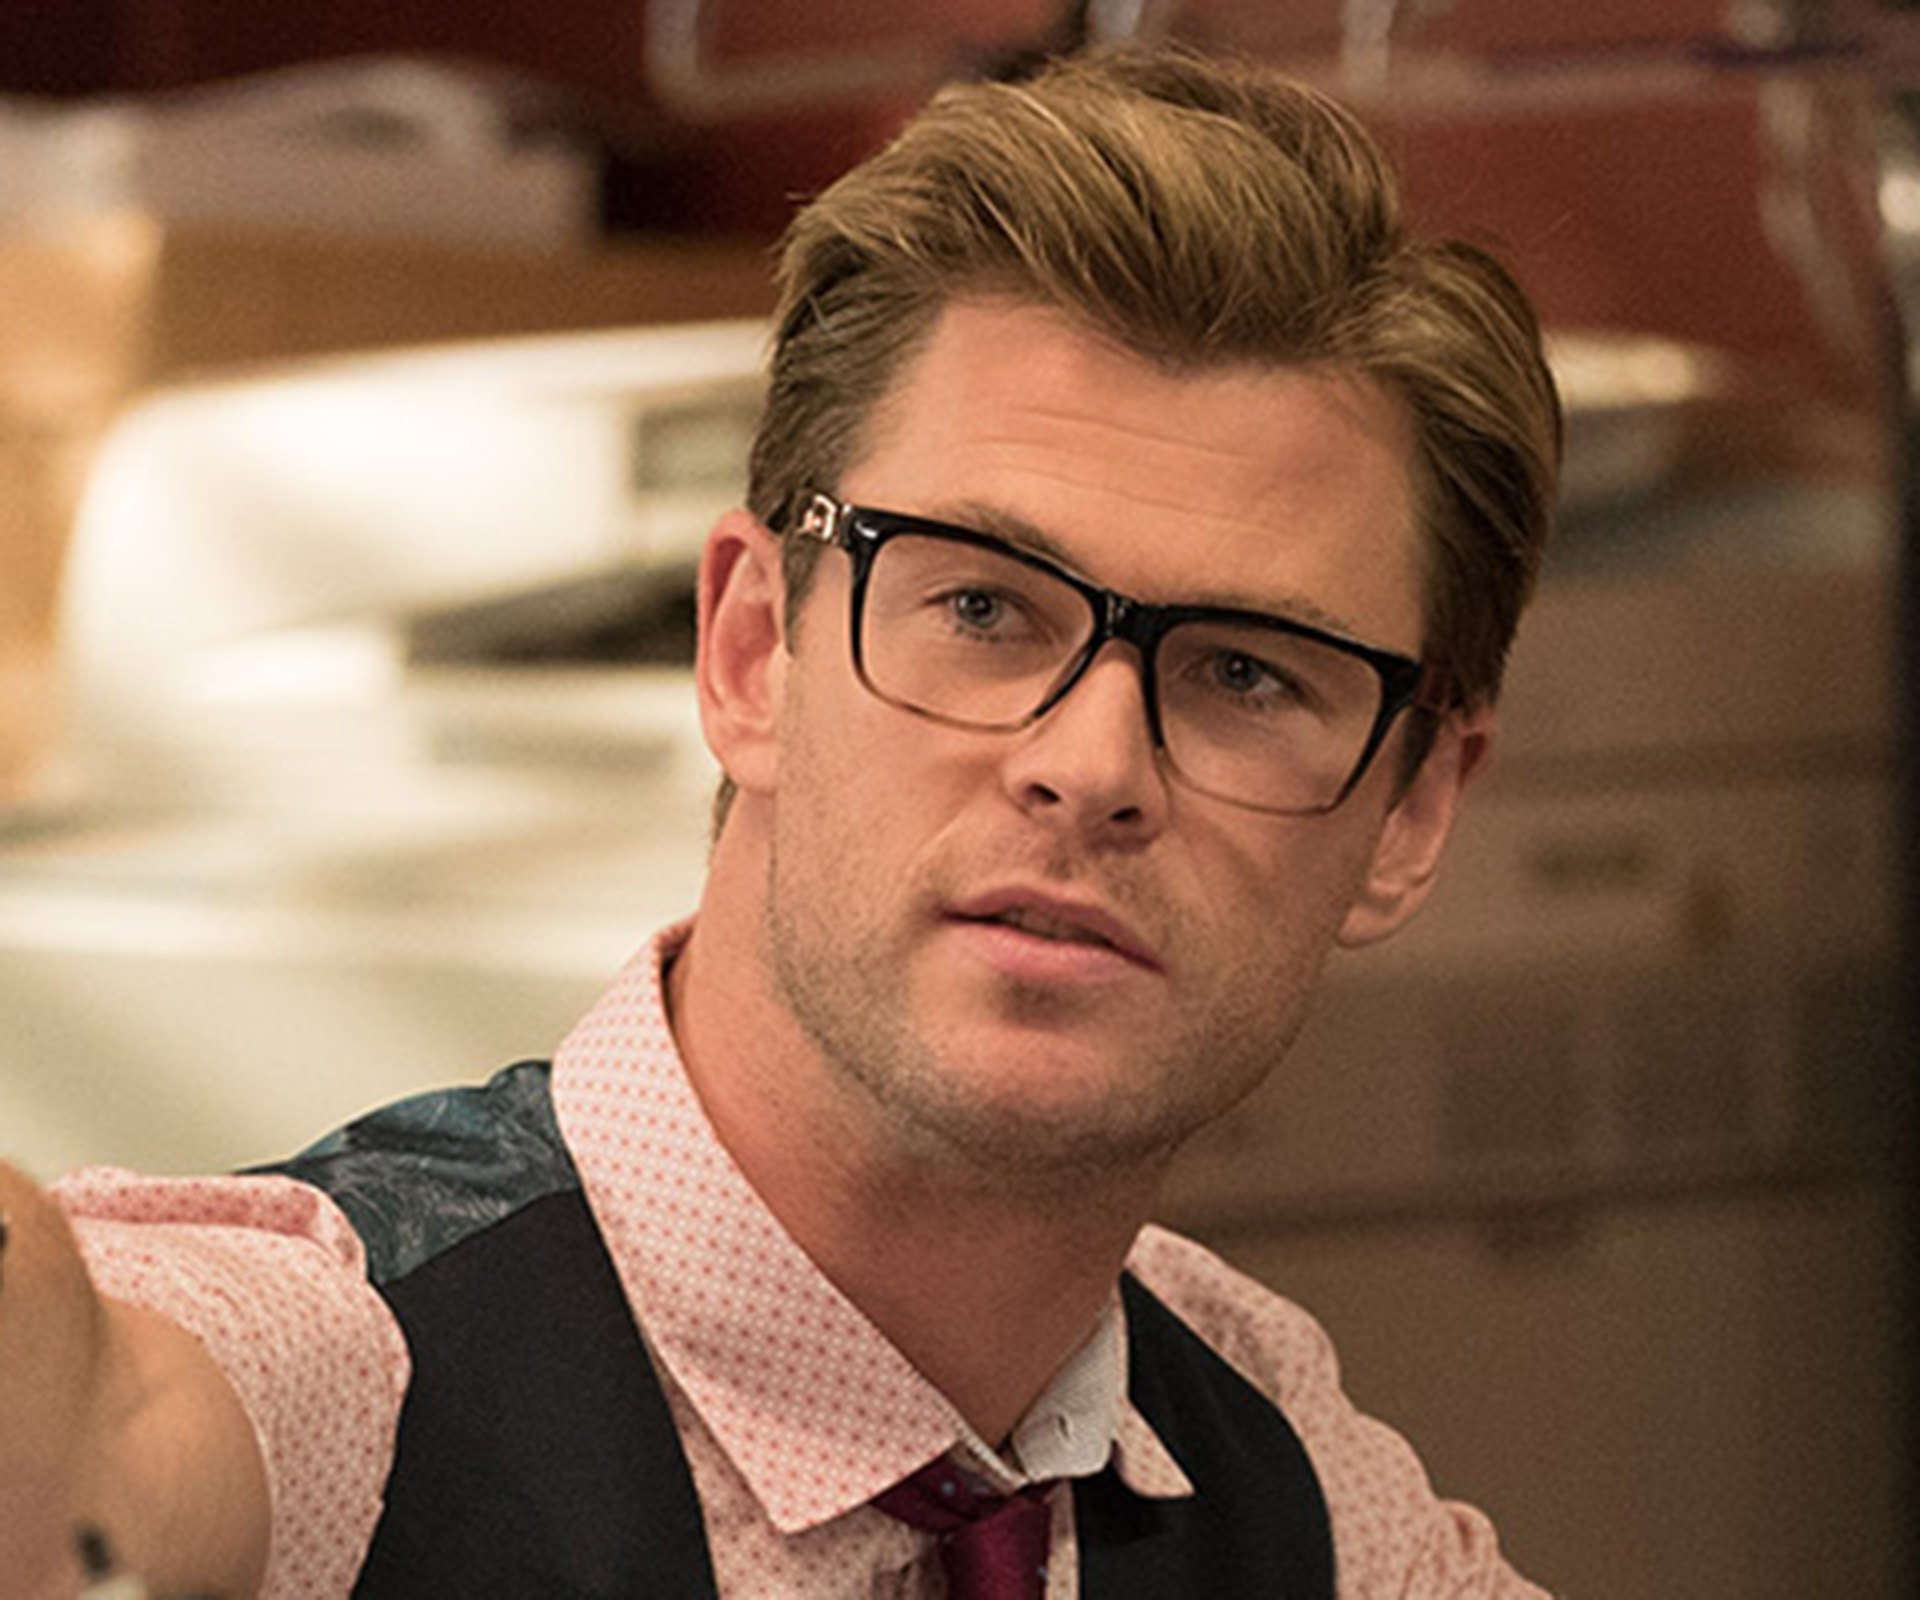 First Look: Chris Hemsworth’s geeky Ghostbusters makeover